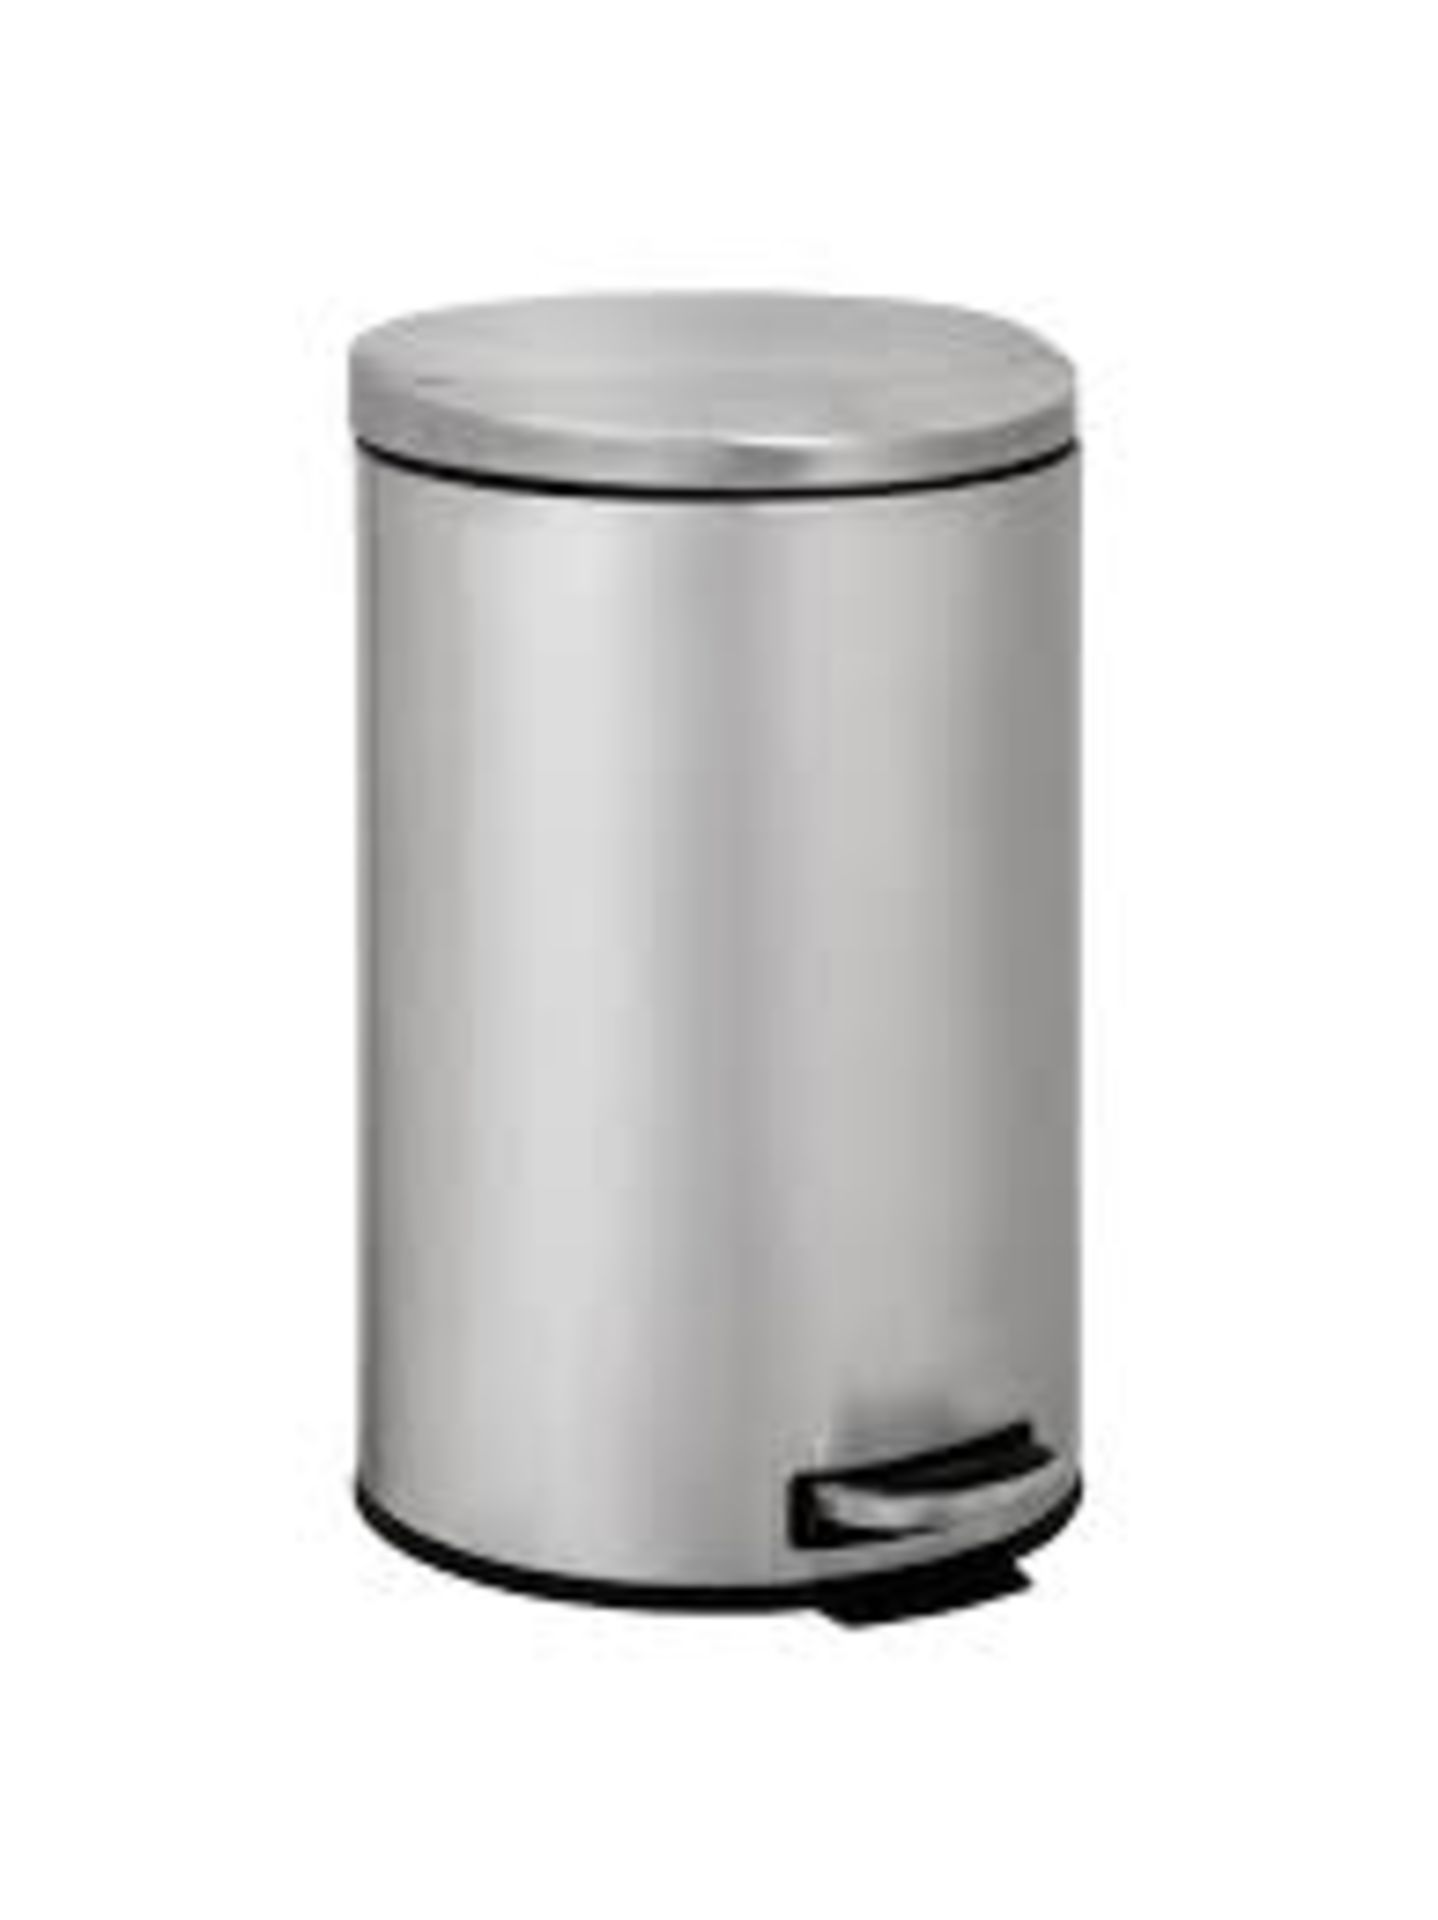 Boxed Assorted House By John Lewis 12 Litre Pedal Bins RRP £30 Each (NBW701933) (NBW590349) (